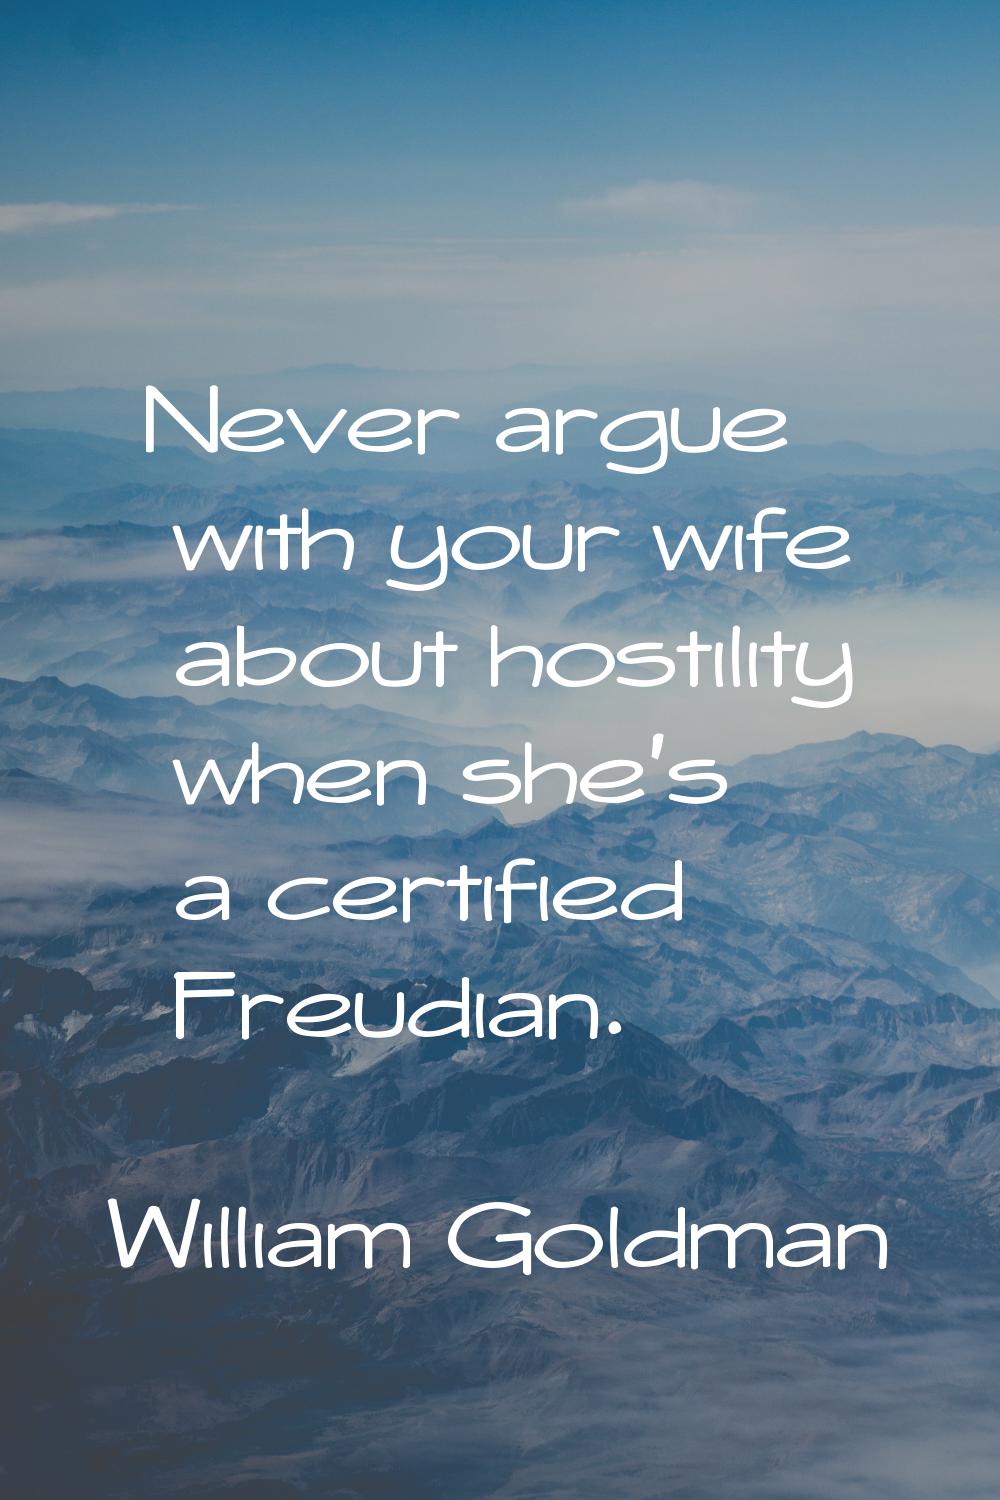 Never argue with your wife about hostility when she's a certified Freudian.